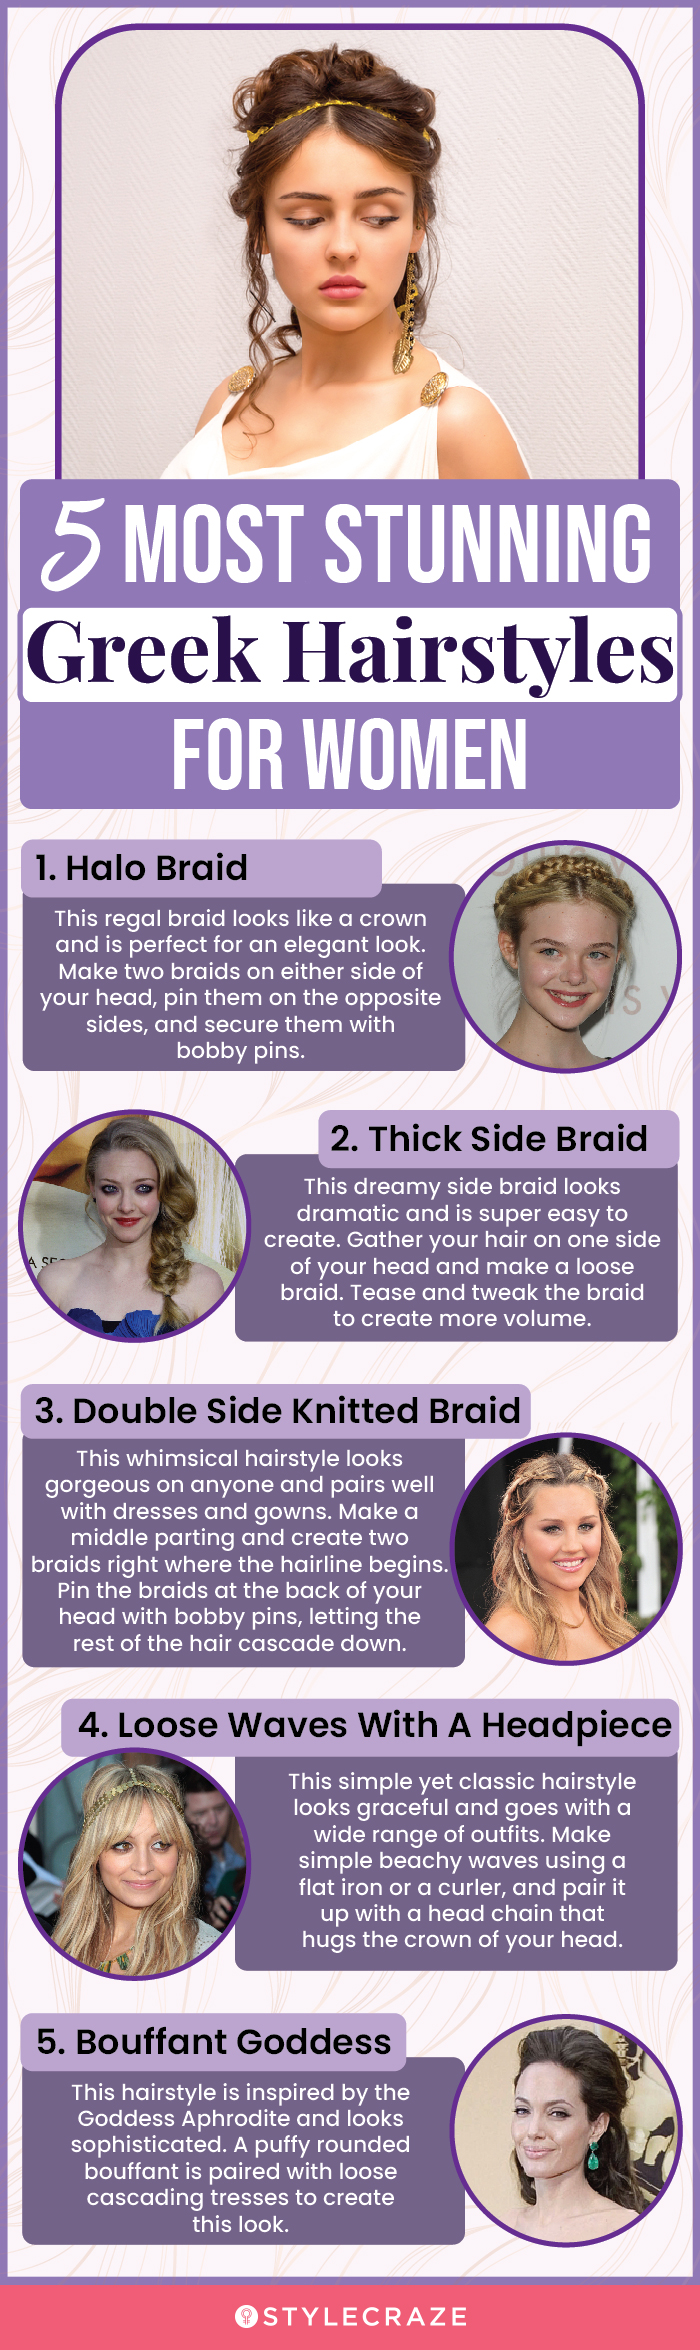 5 most stunning greek hairstyles for women (infographic)